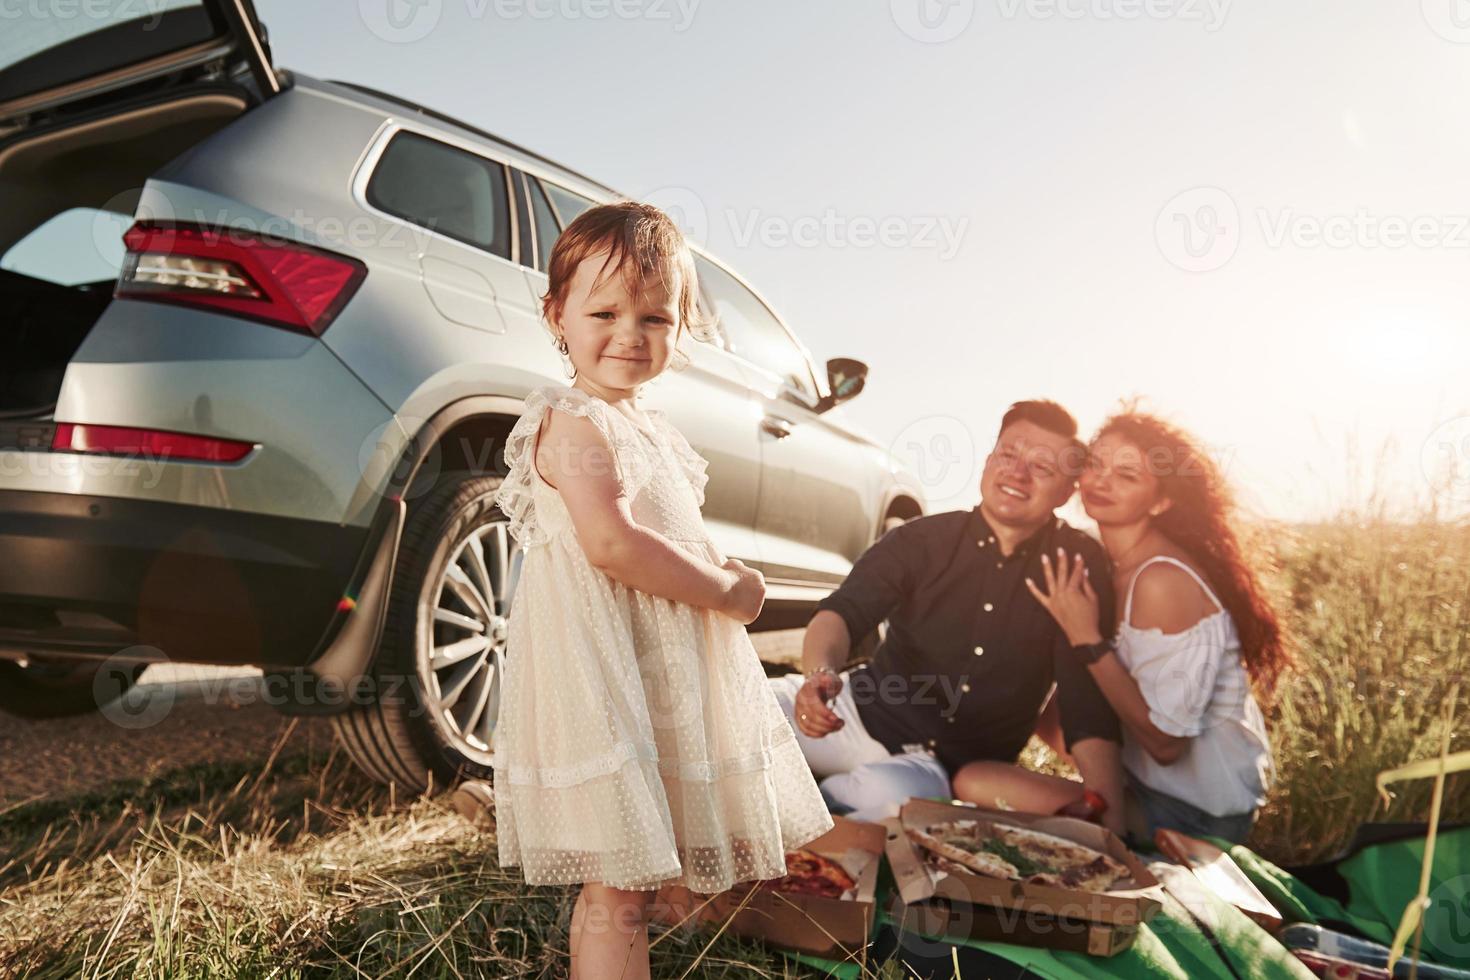 Cute dress on kid. Family have picnic at countryside near silver automobile at sunset photo